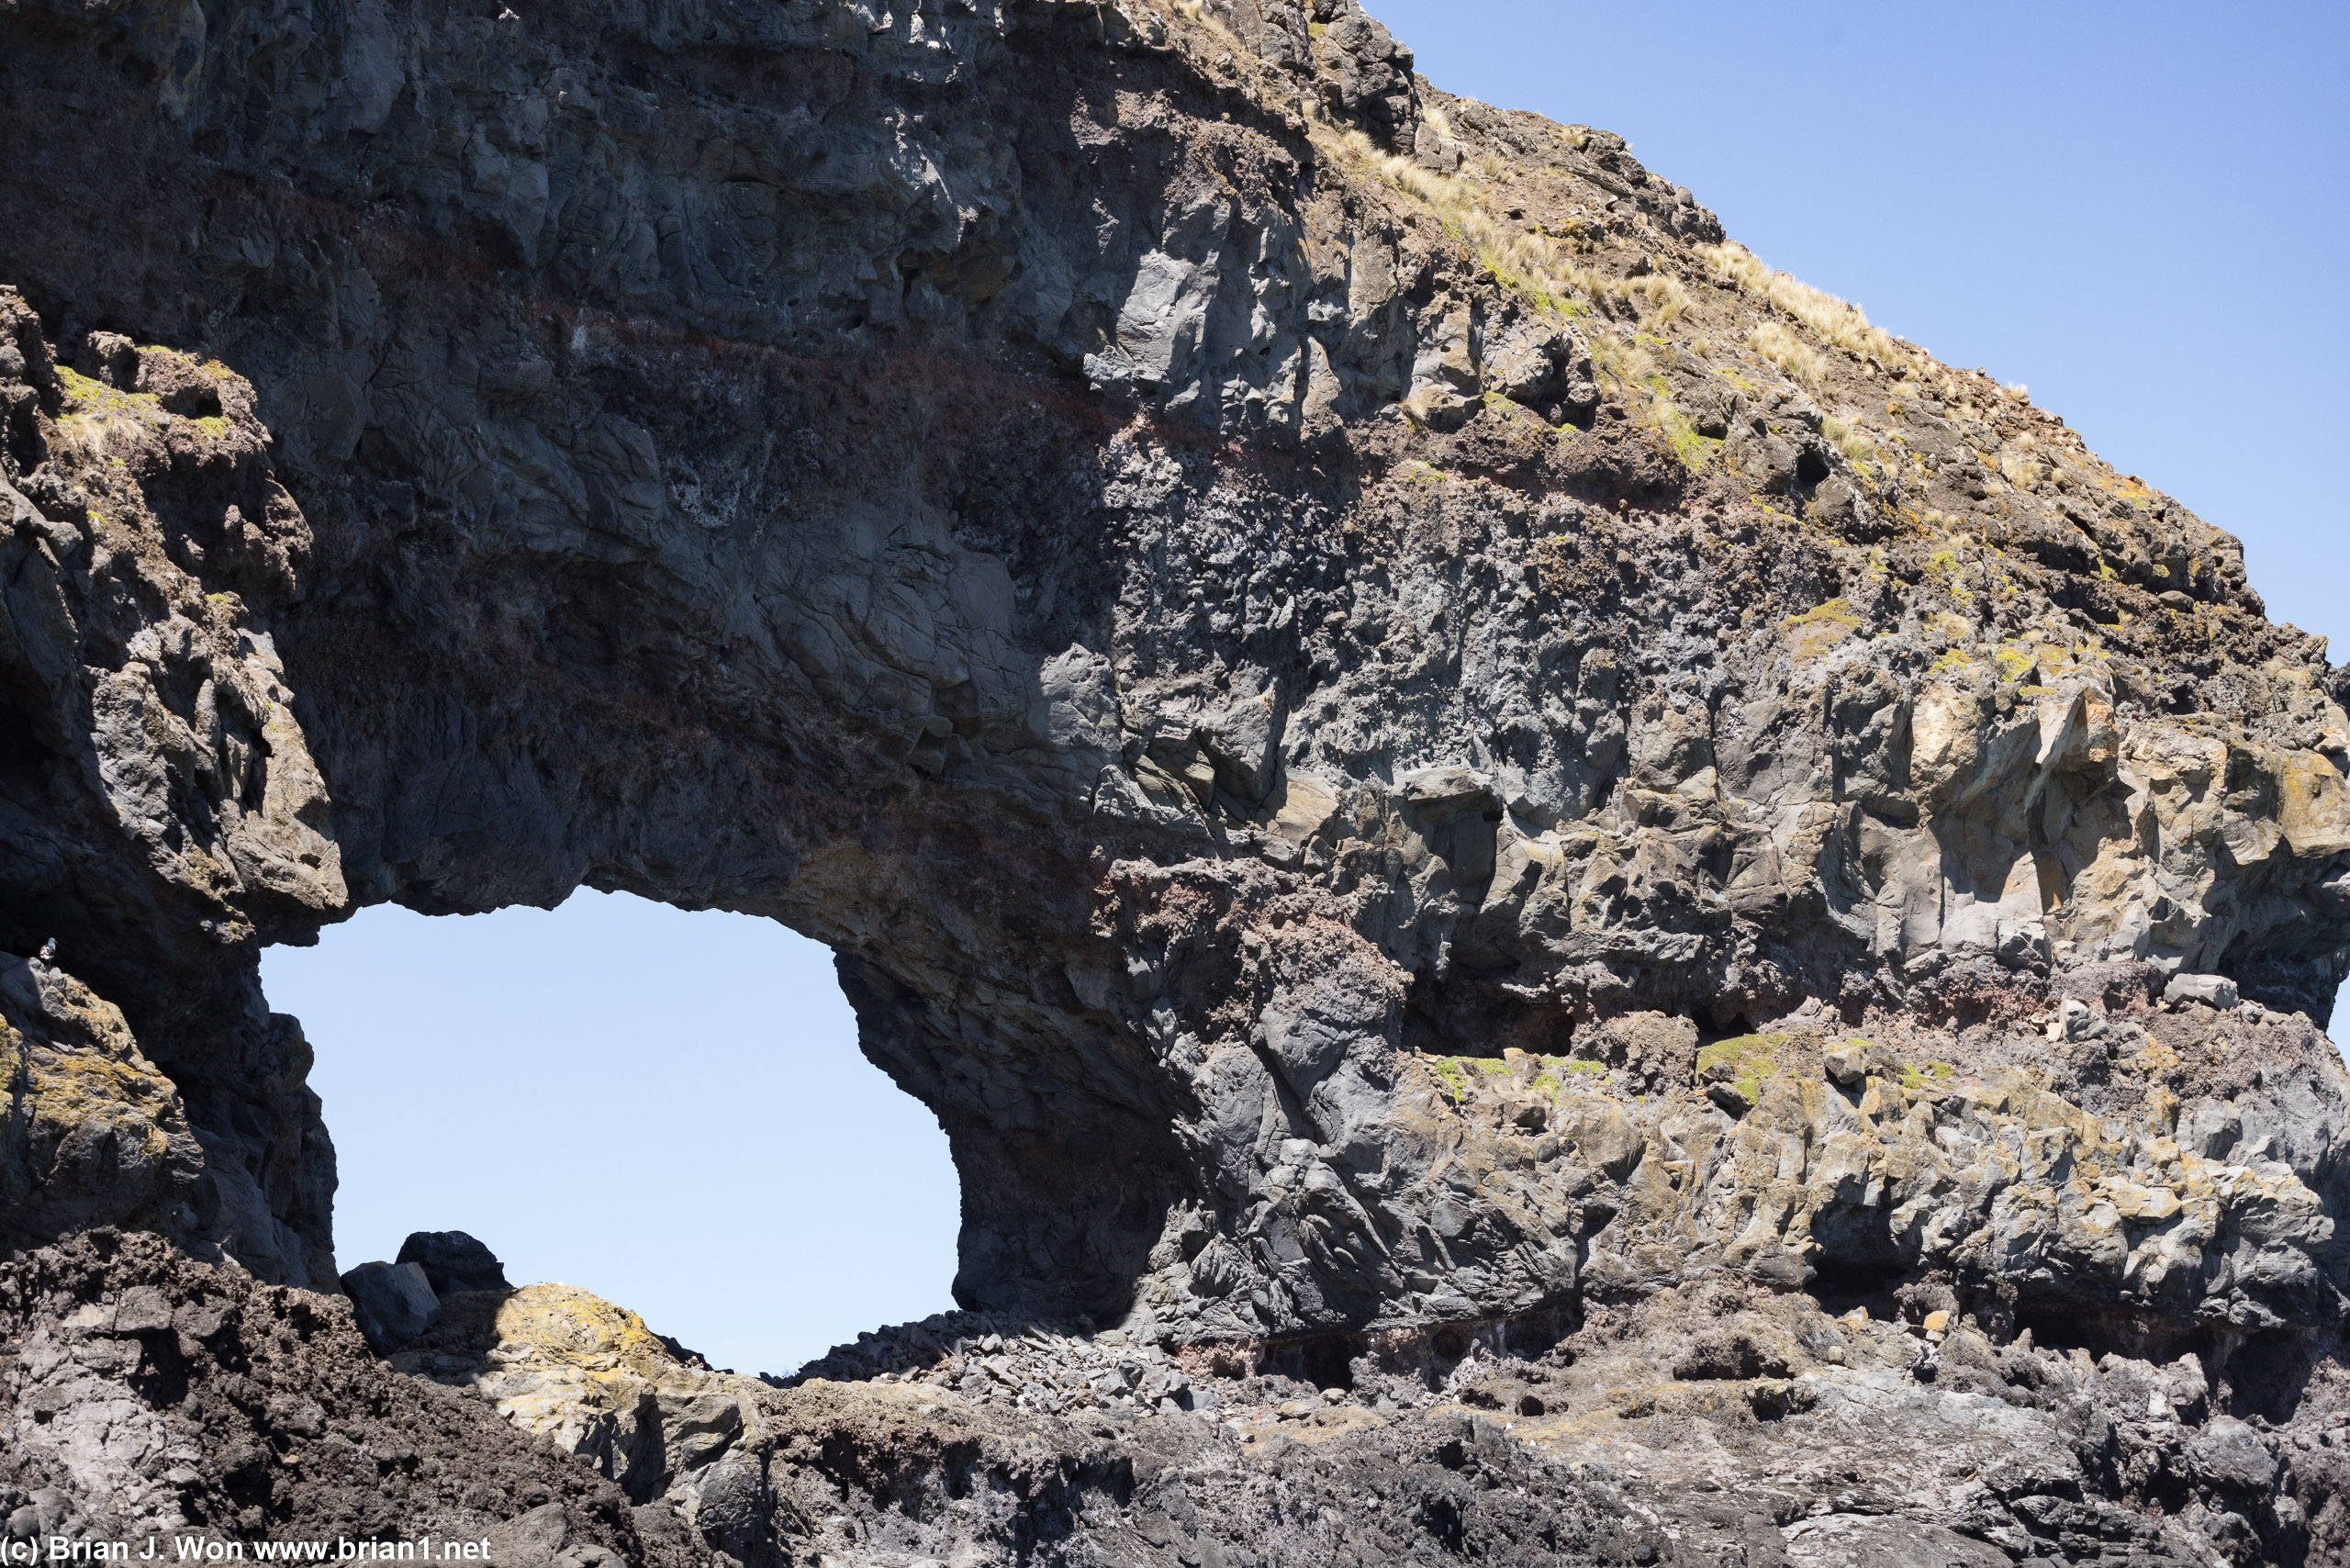 Some neat rock arches/holes.